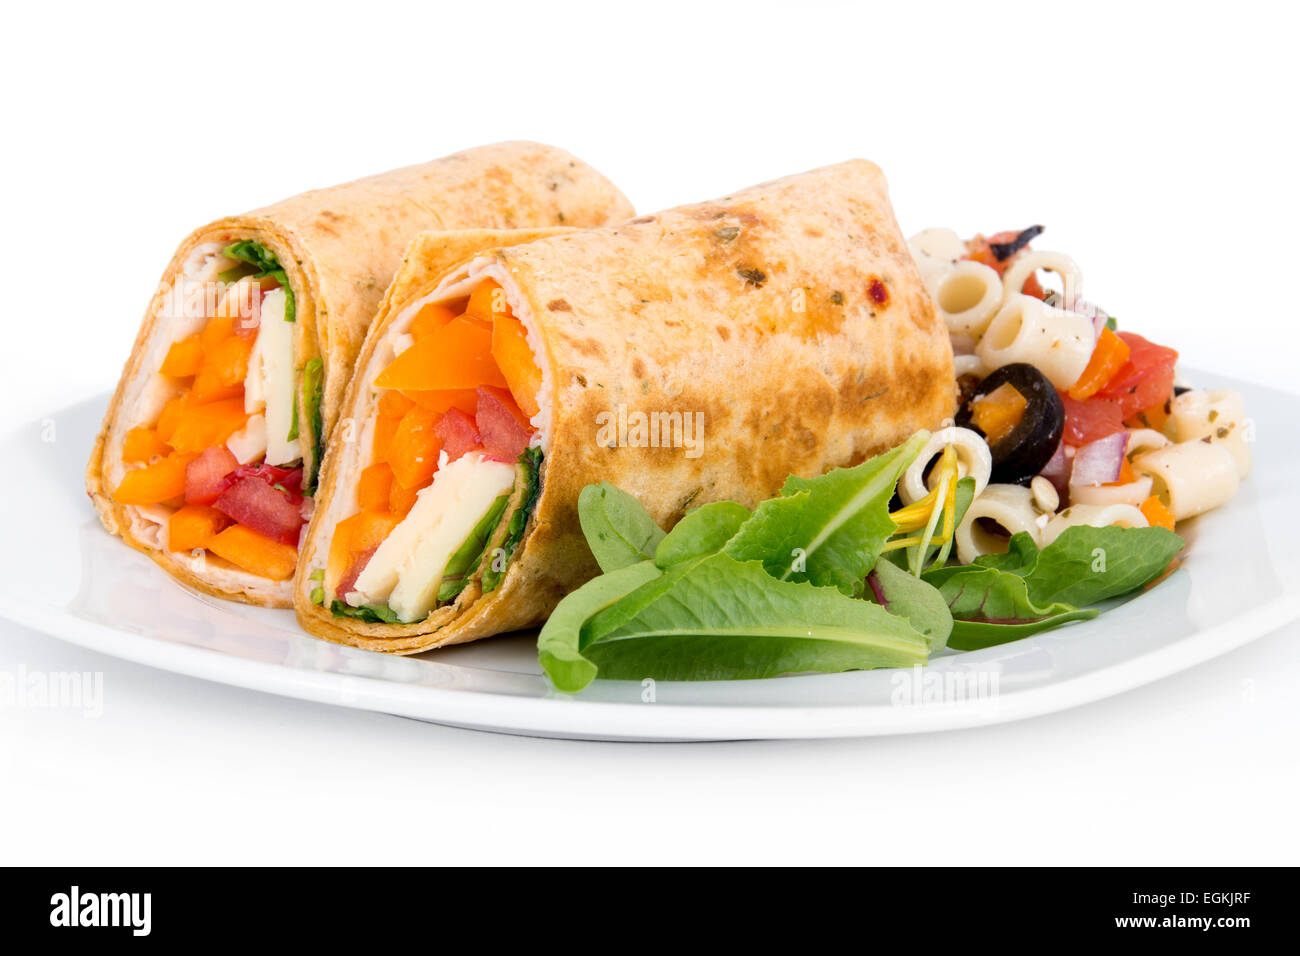 sandwich tortilla wrap closeup on plate over white background Stock Photo